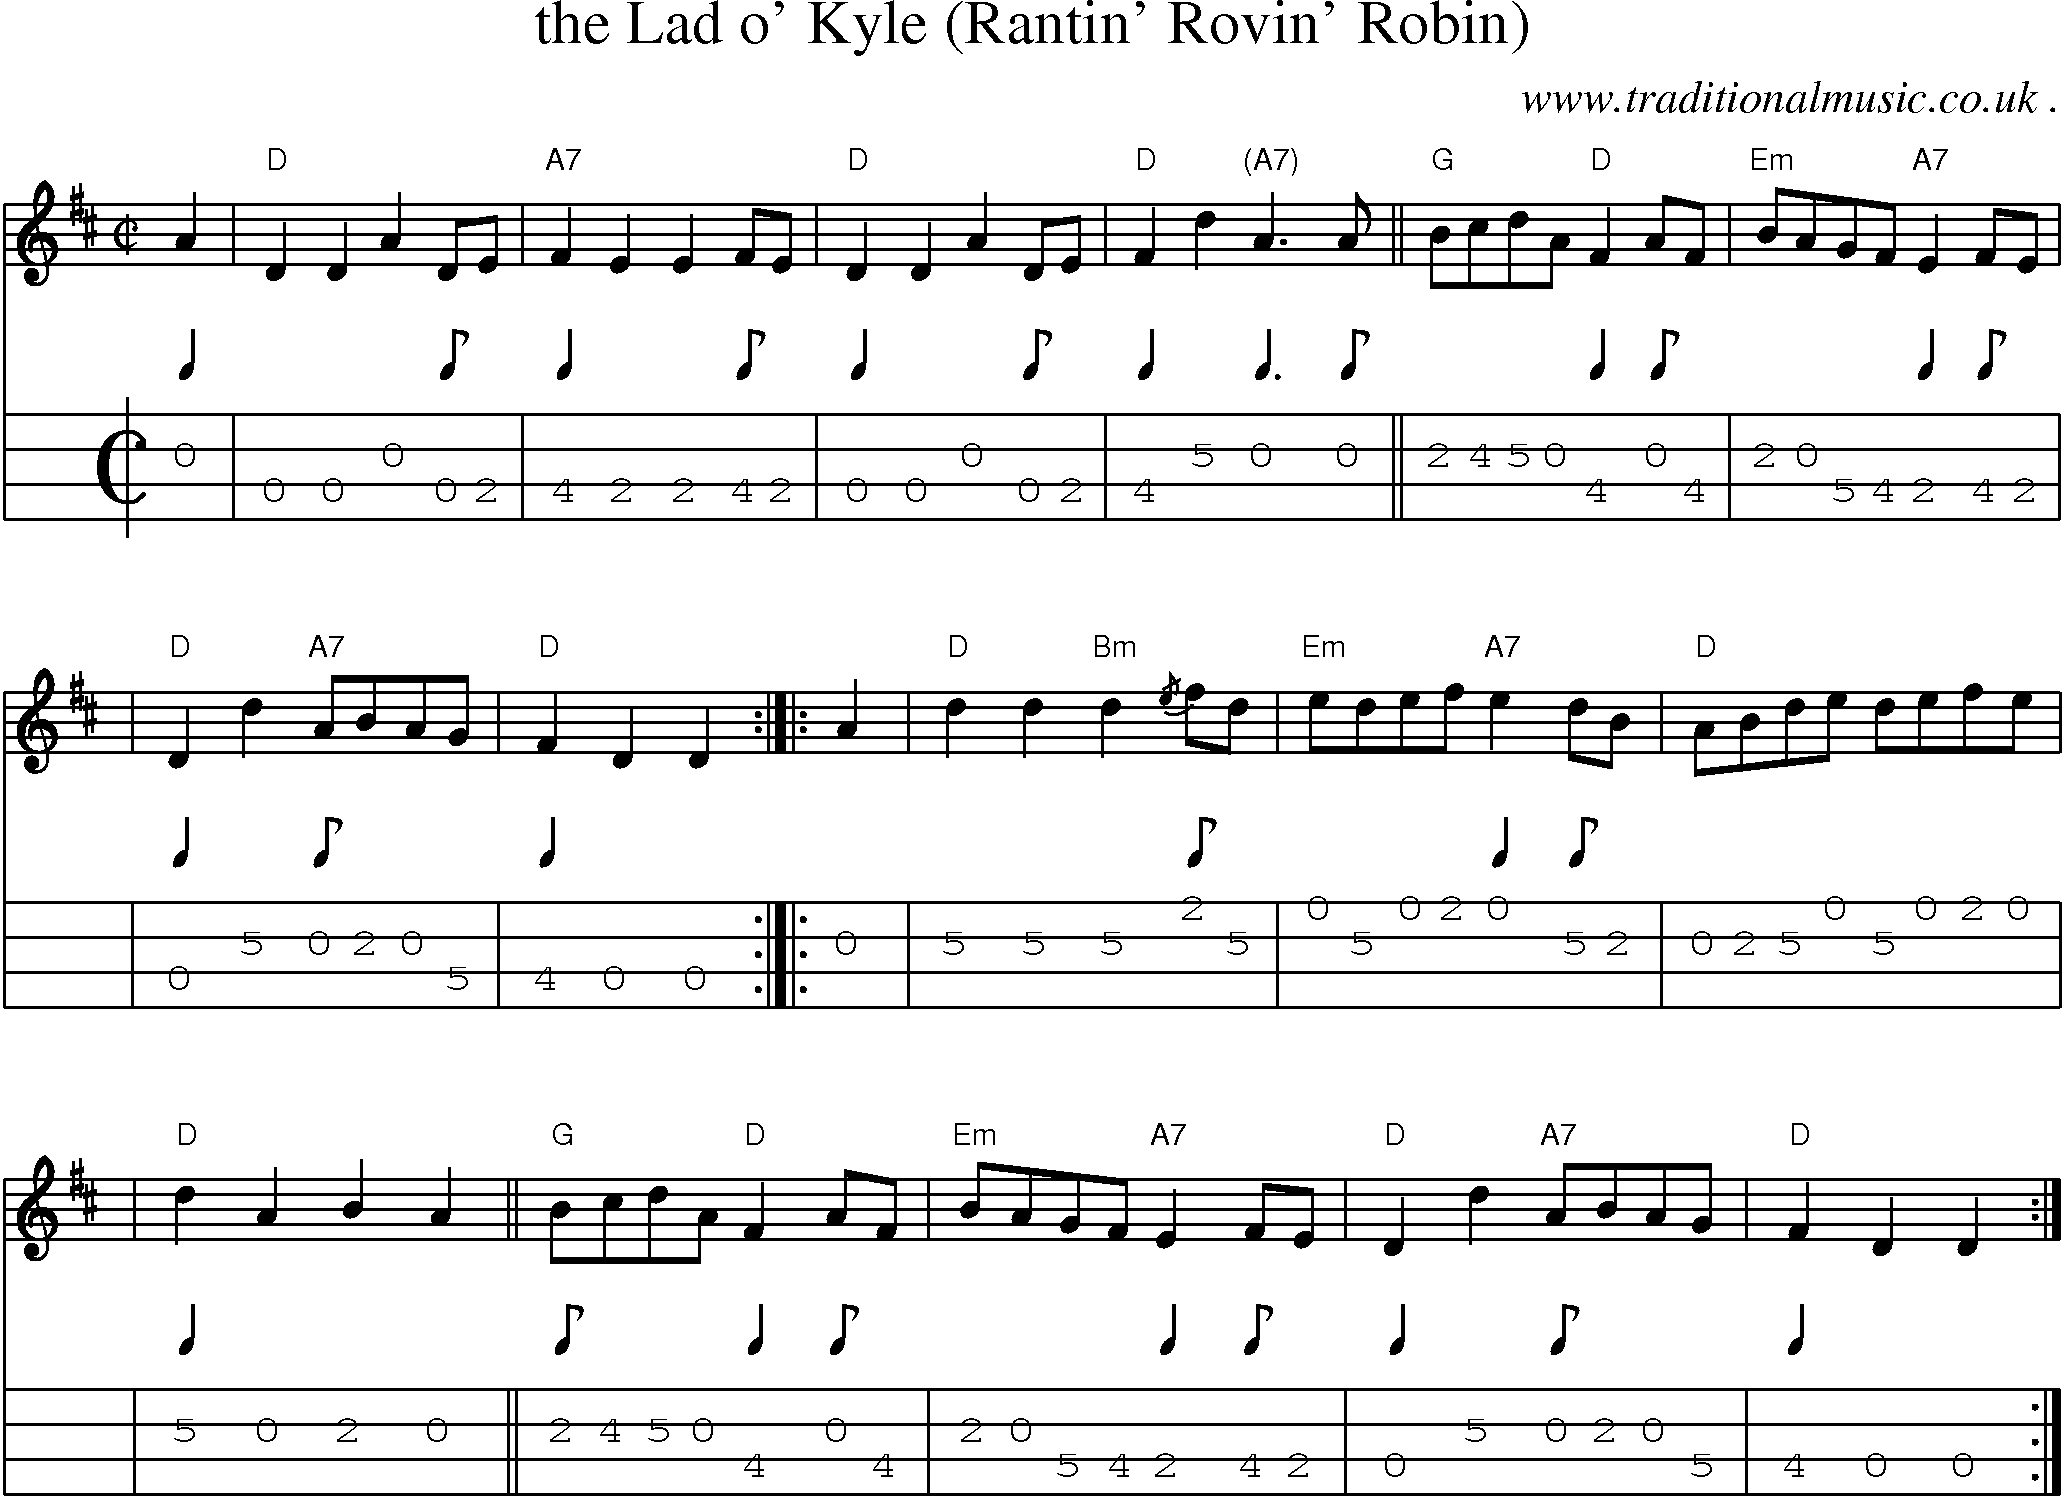 Sheet-music  score, Chords and Mandolin Tabs for The Lad O Kyle Rantin Rovin Robin